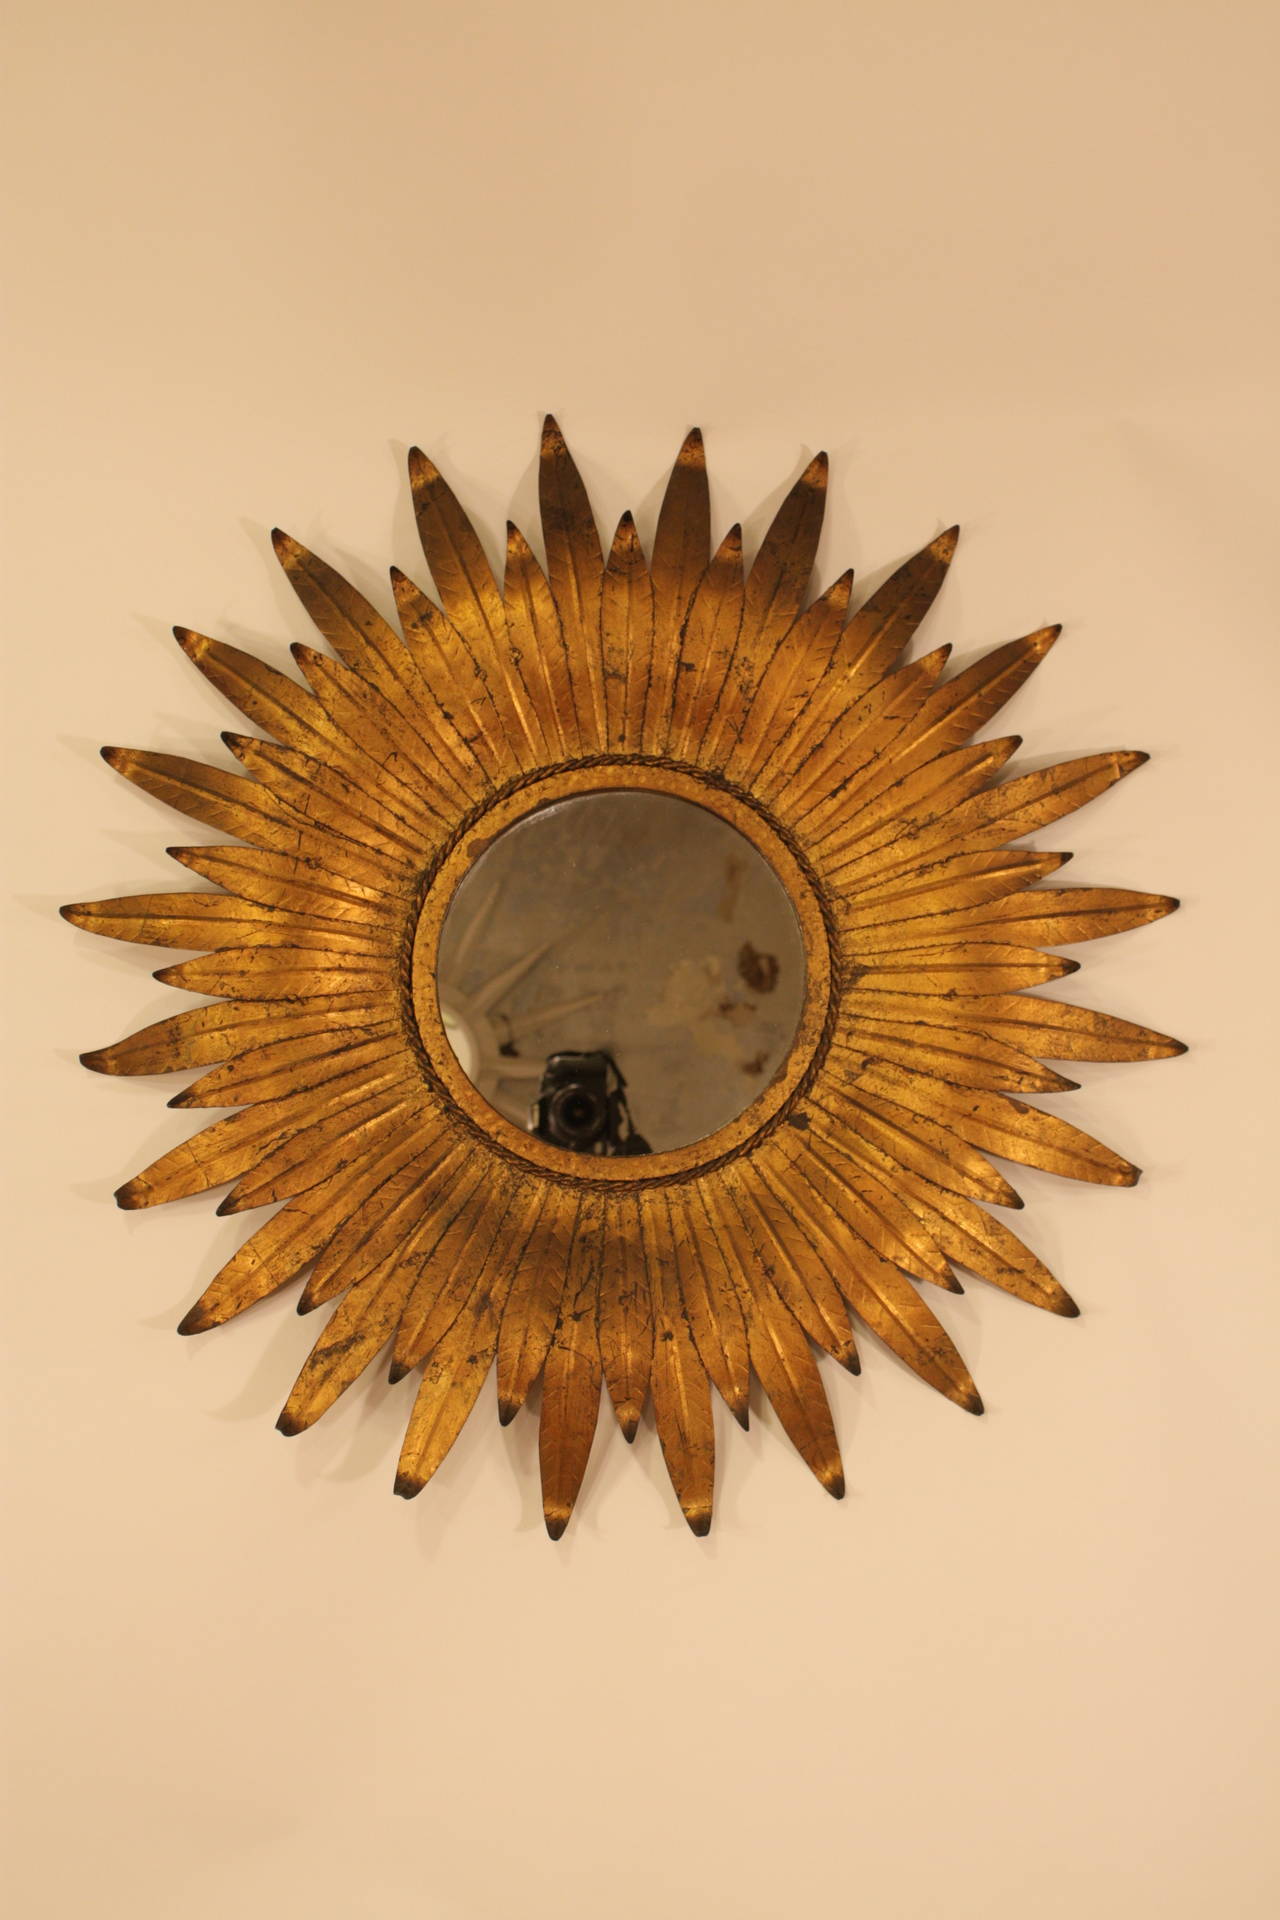 Spanish Gilt Iron Sunburst mirror, curved leaves in two sizes give a gorgeus sensation of movement